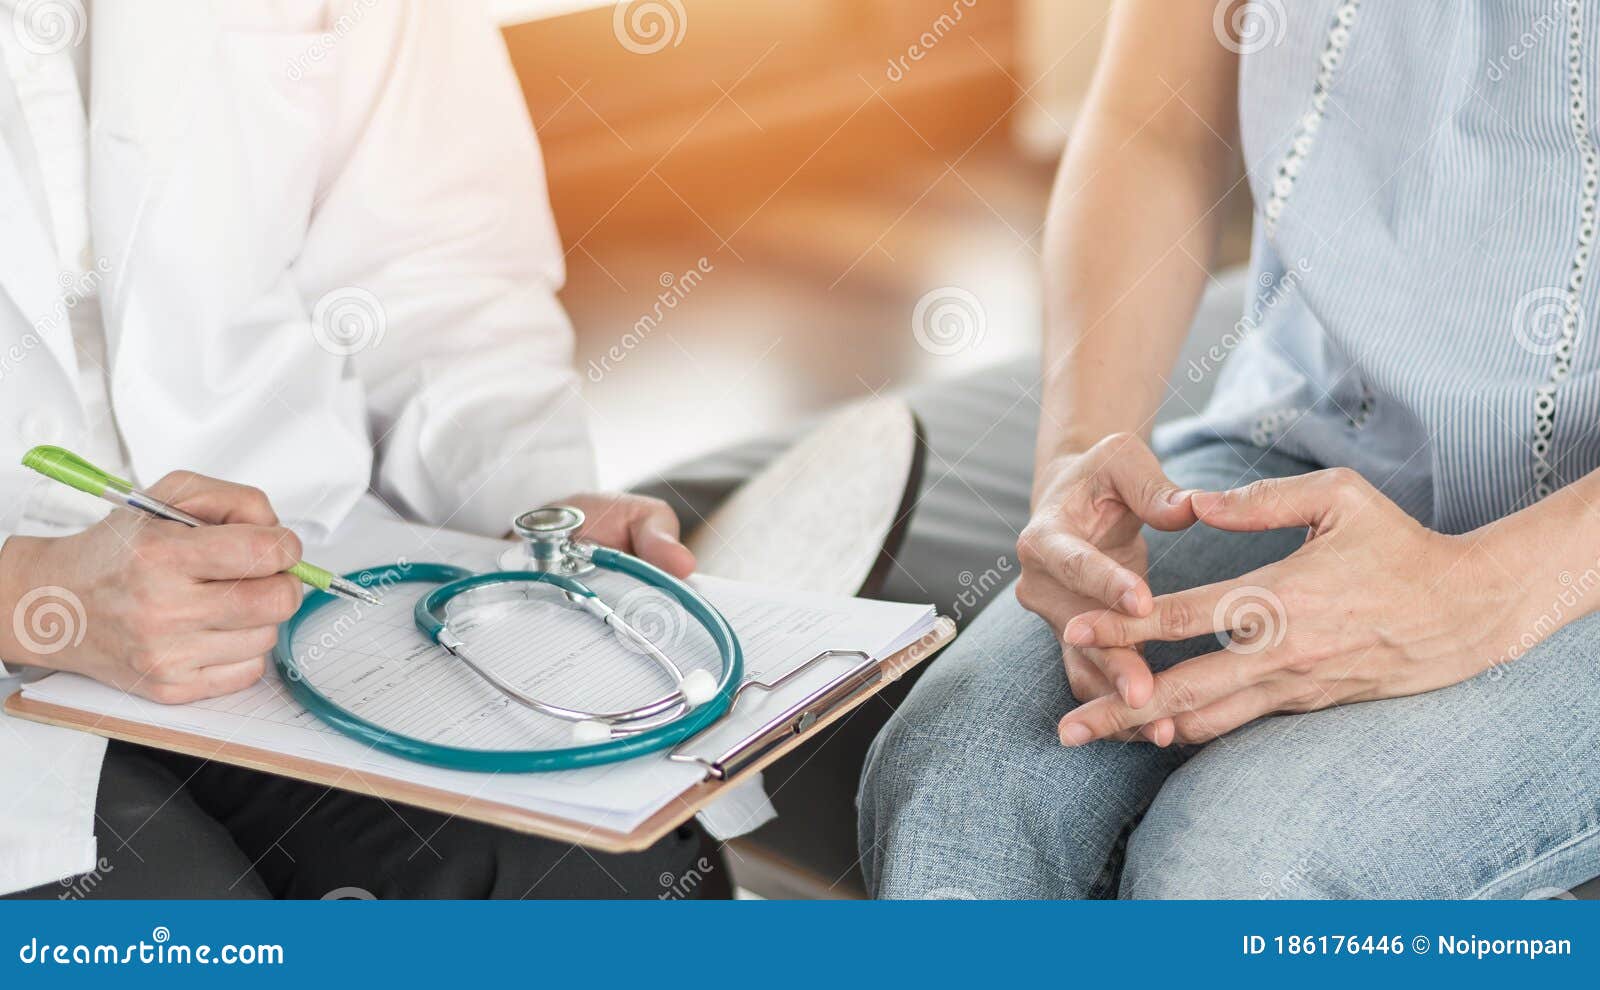 doctor or psychiatrist consulting and diagnostic examining stressful woman patient on obstetric - gynecological female illness